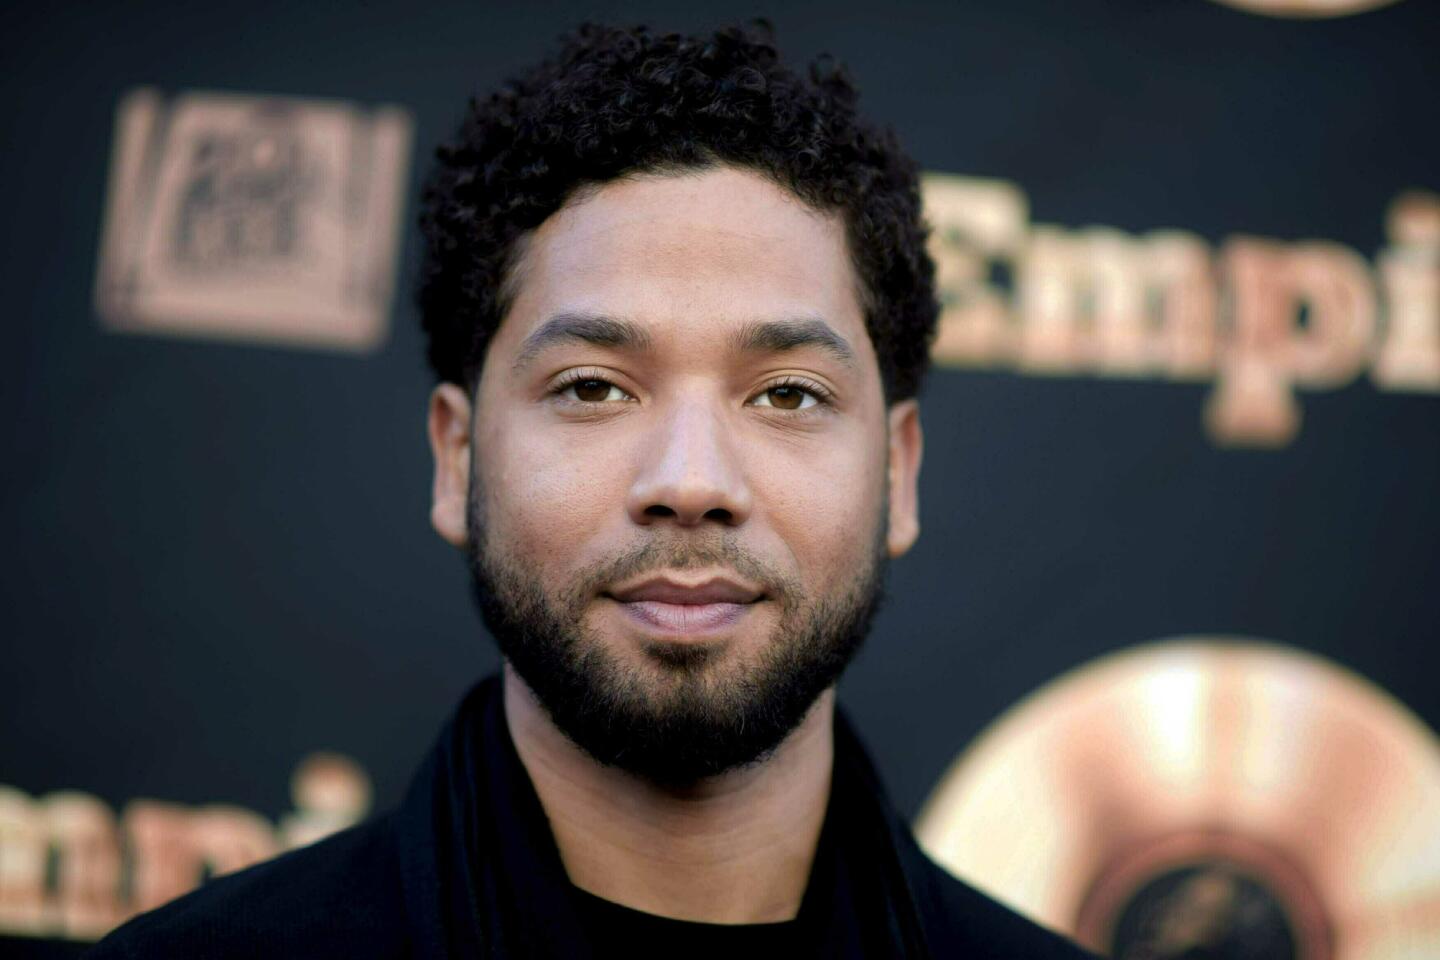 Actor and singer Jussie Smollett attends the "Empire" FYC Event in Los Angeles.